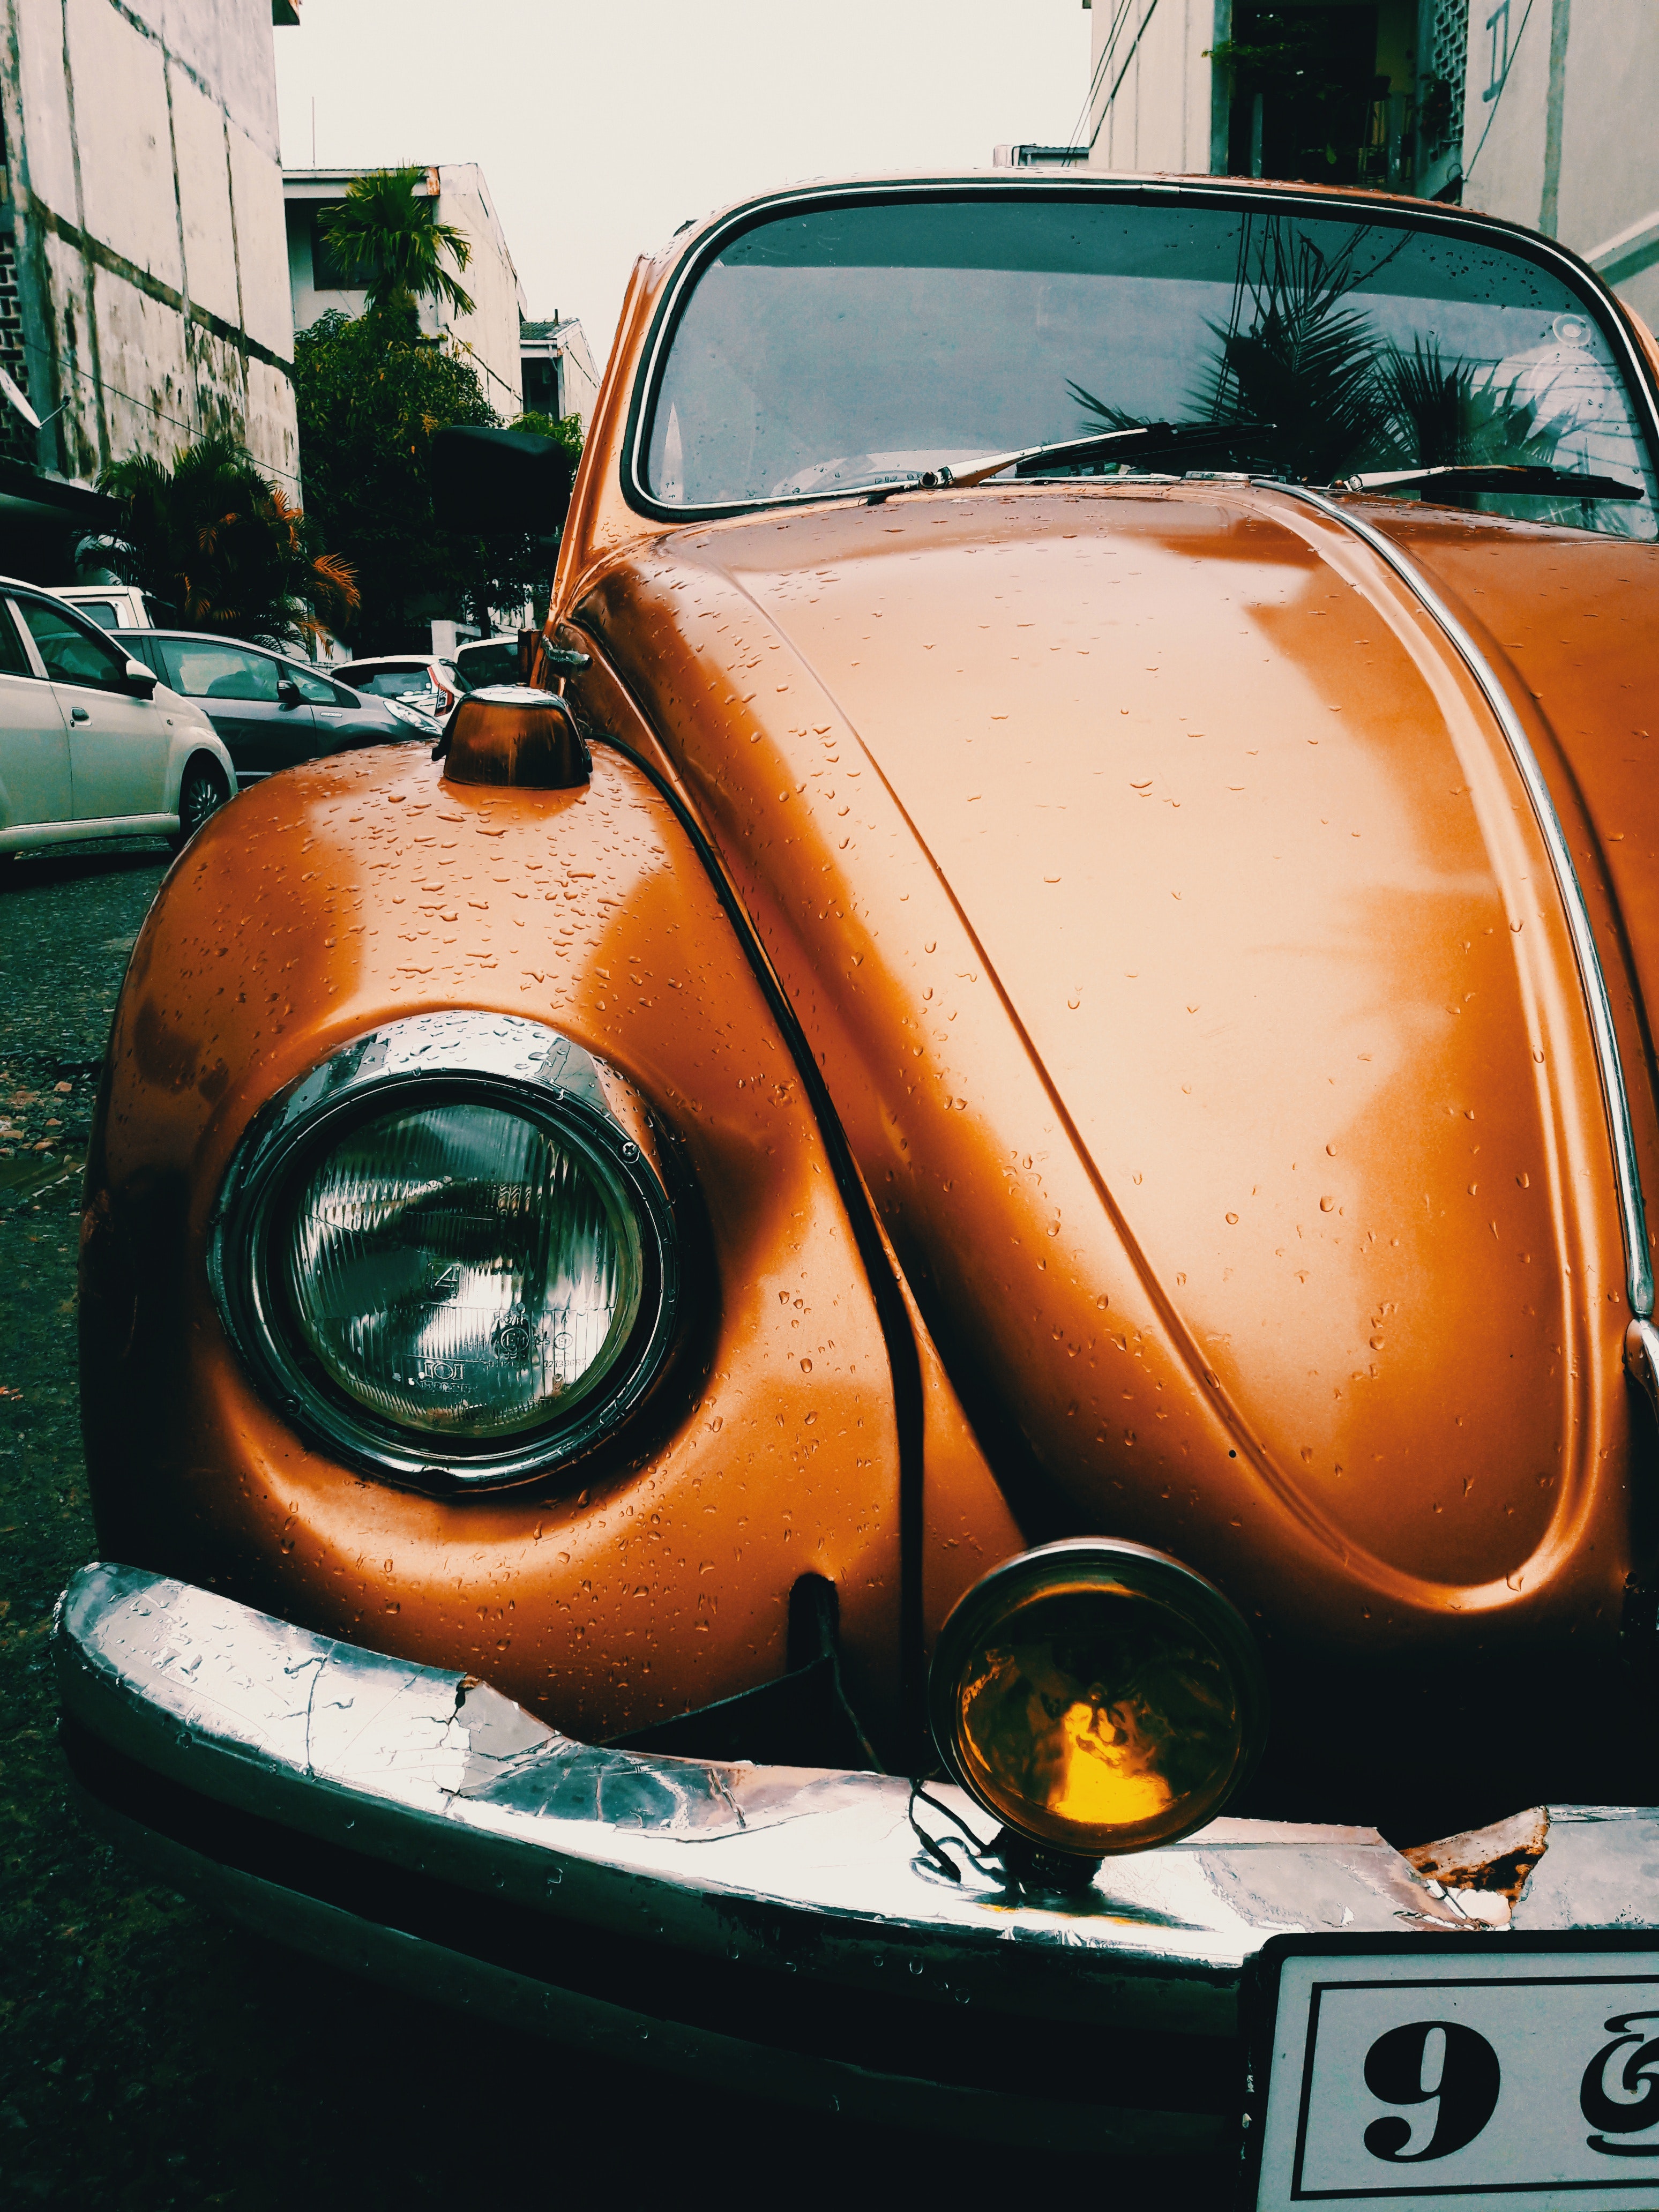 106053 download wallpaper auto, volkswagen, cars, retro, classic, volkswagen beetle screensavers and pictures for free